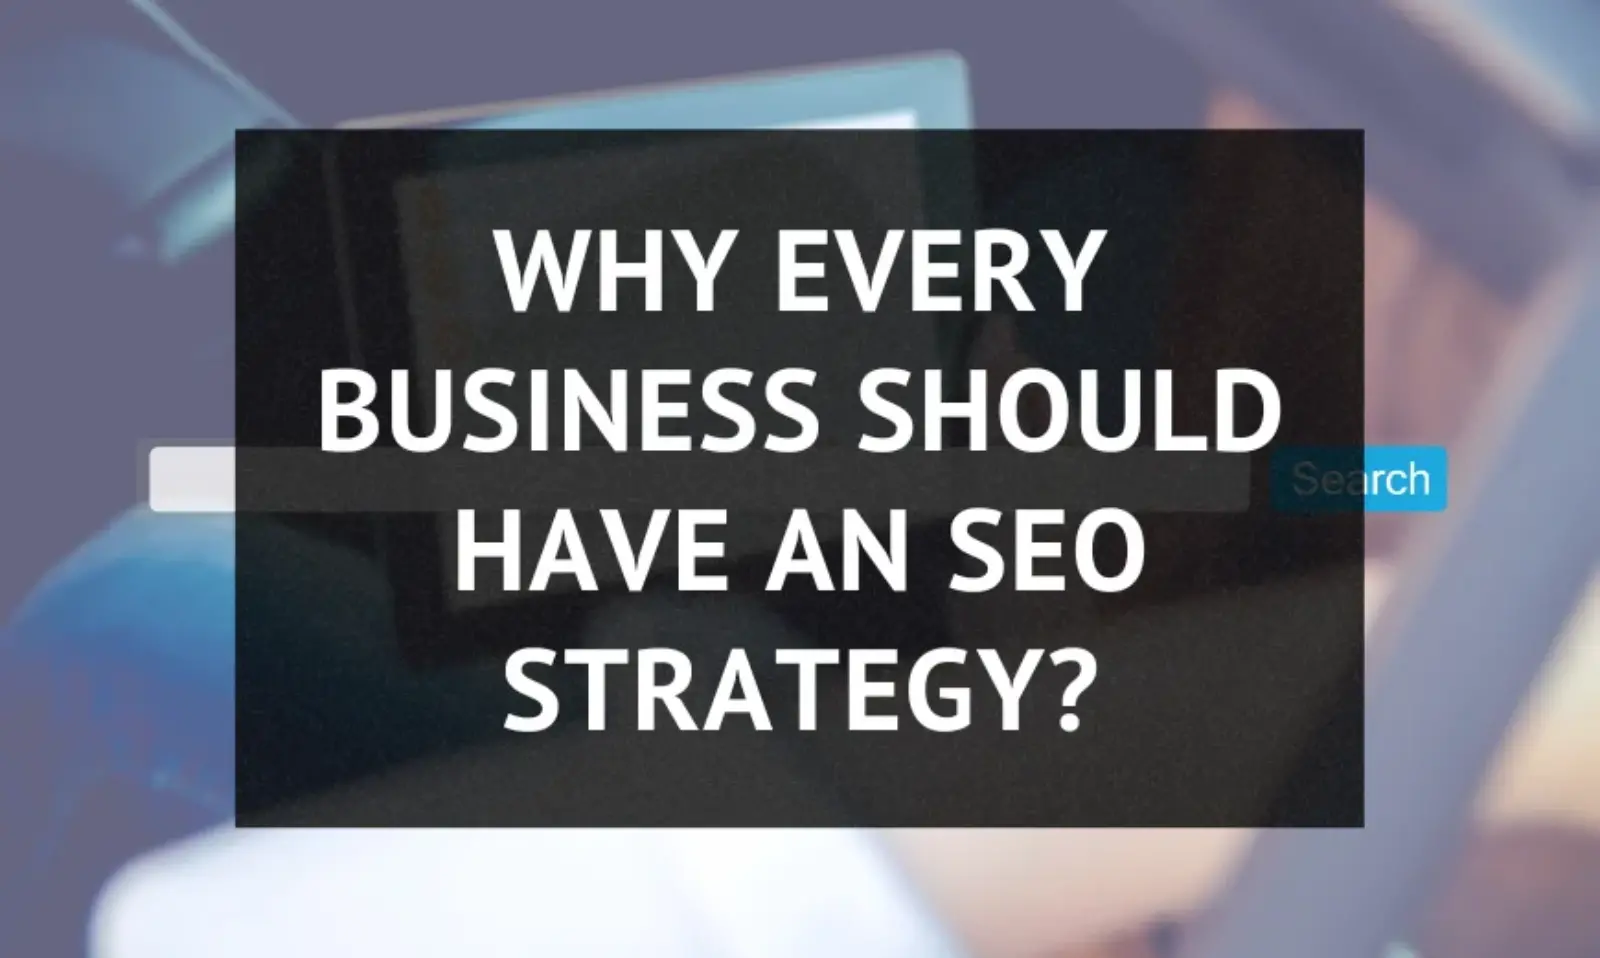 Why Every Business Should Have an SEO Strategy?